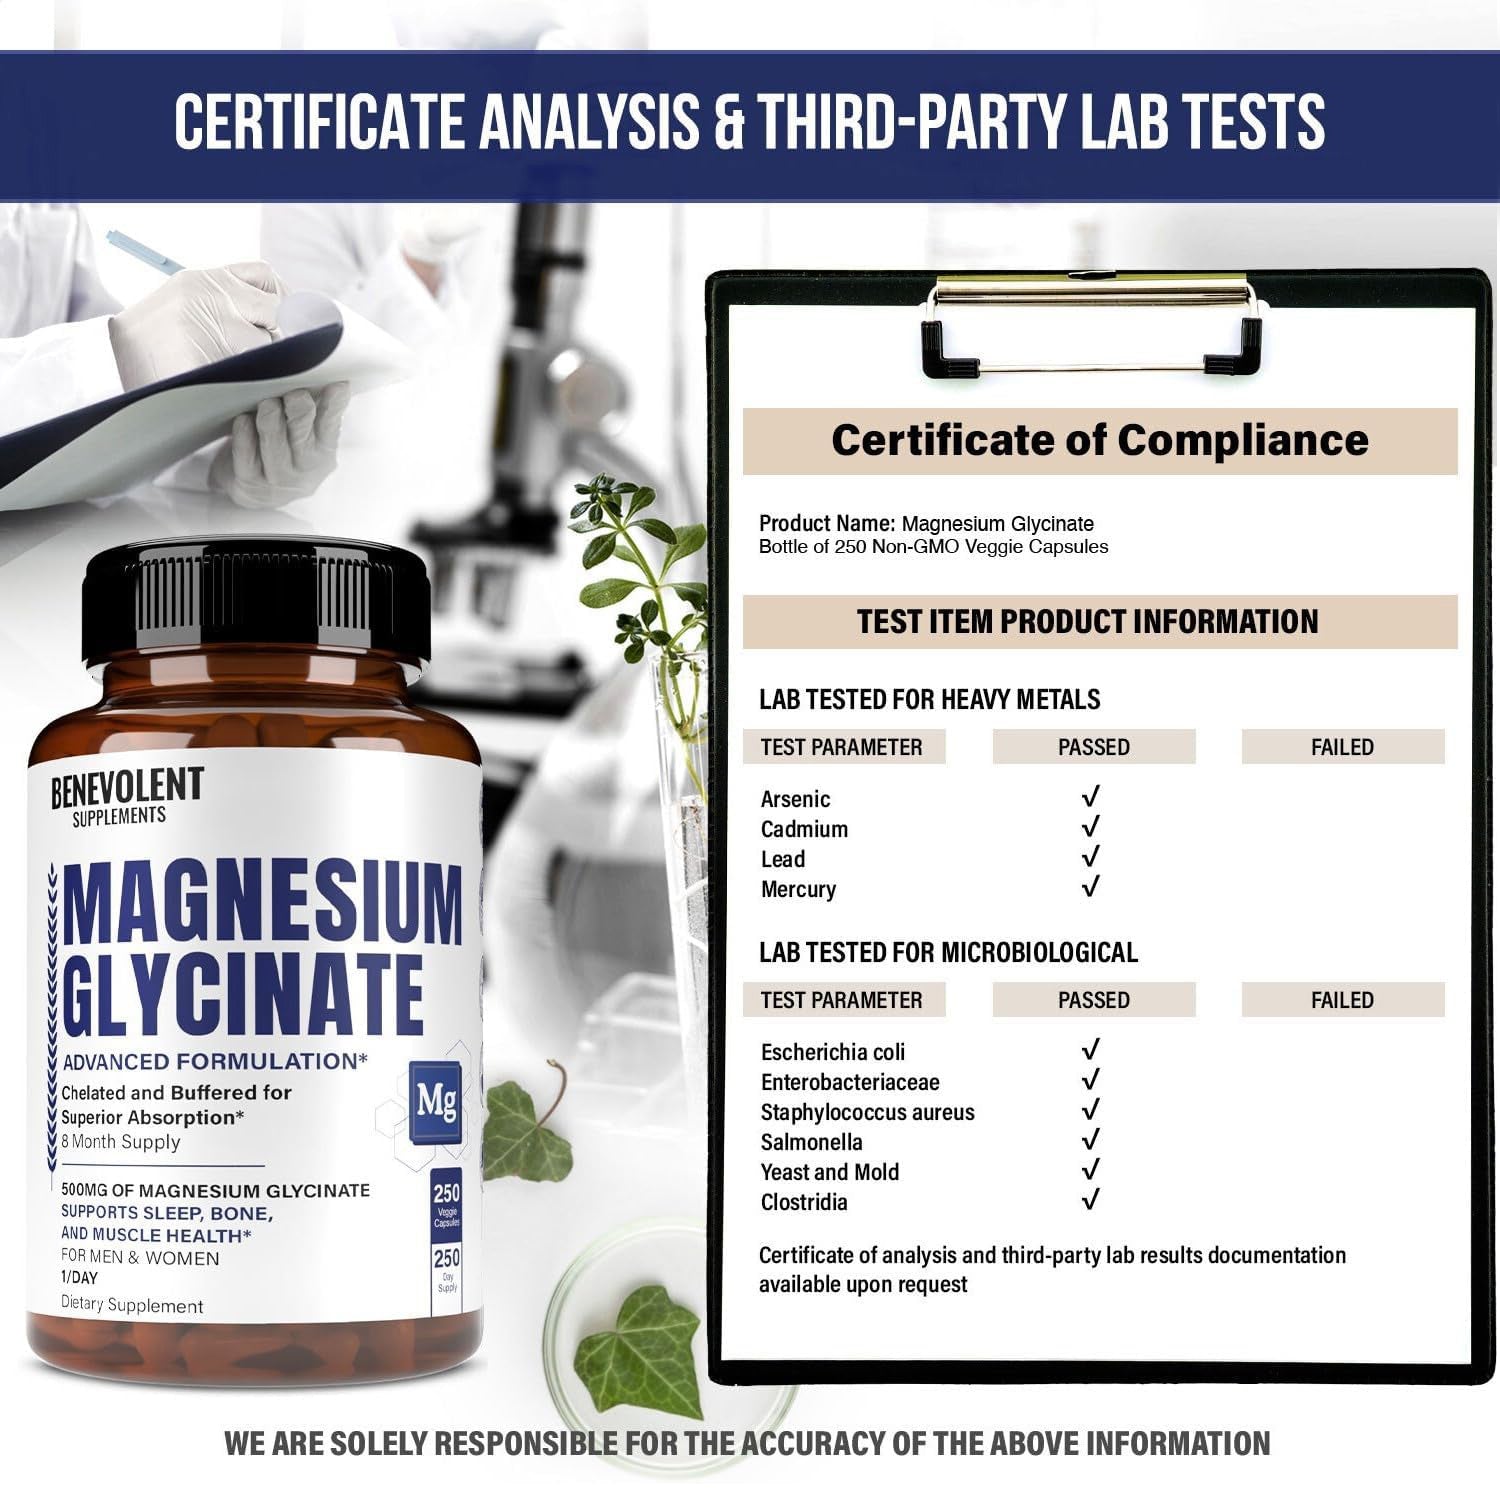 Certificate of analysis and third-party lab tests